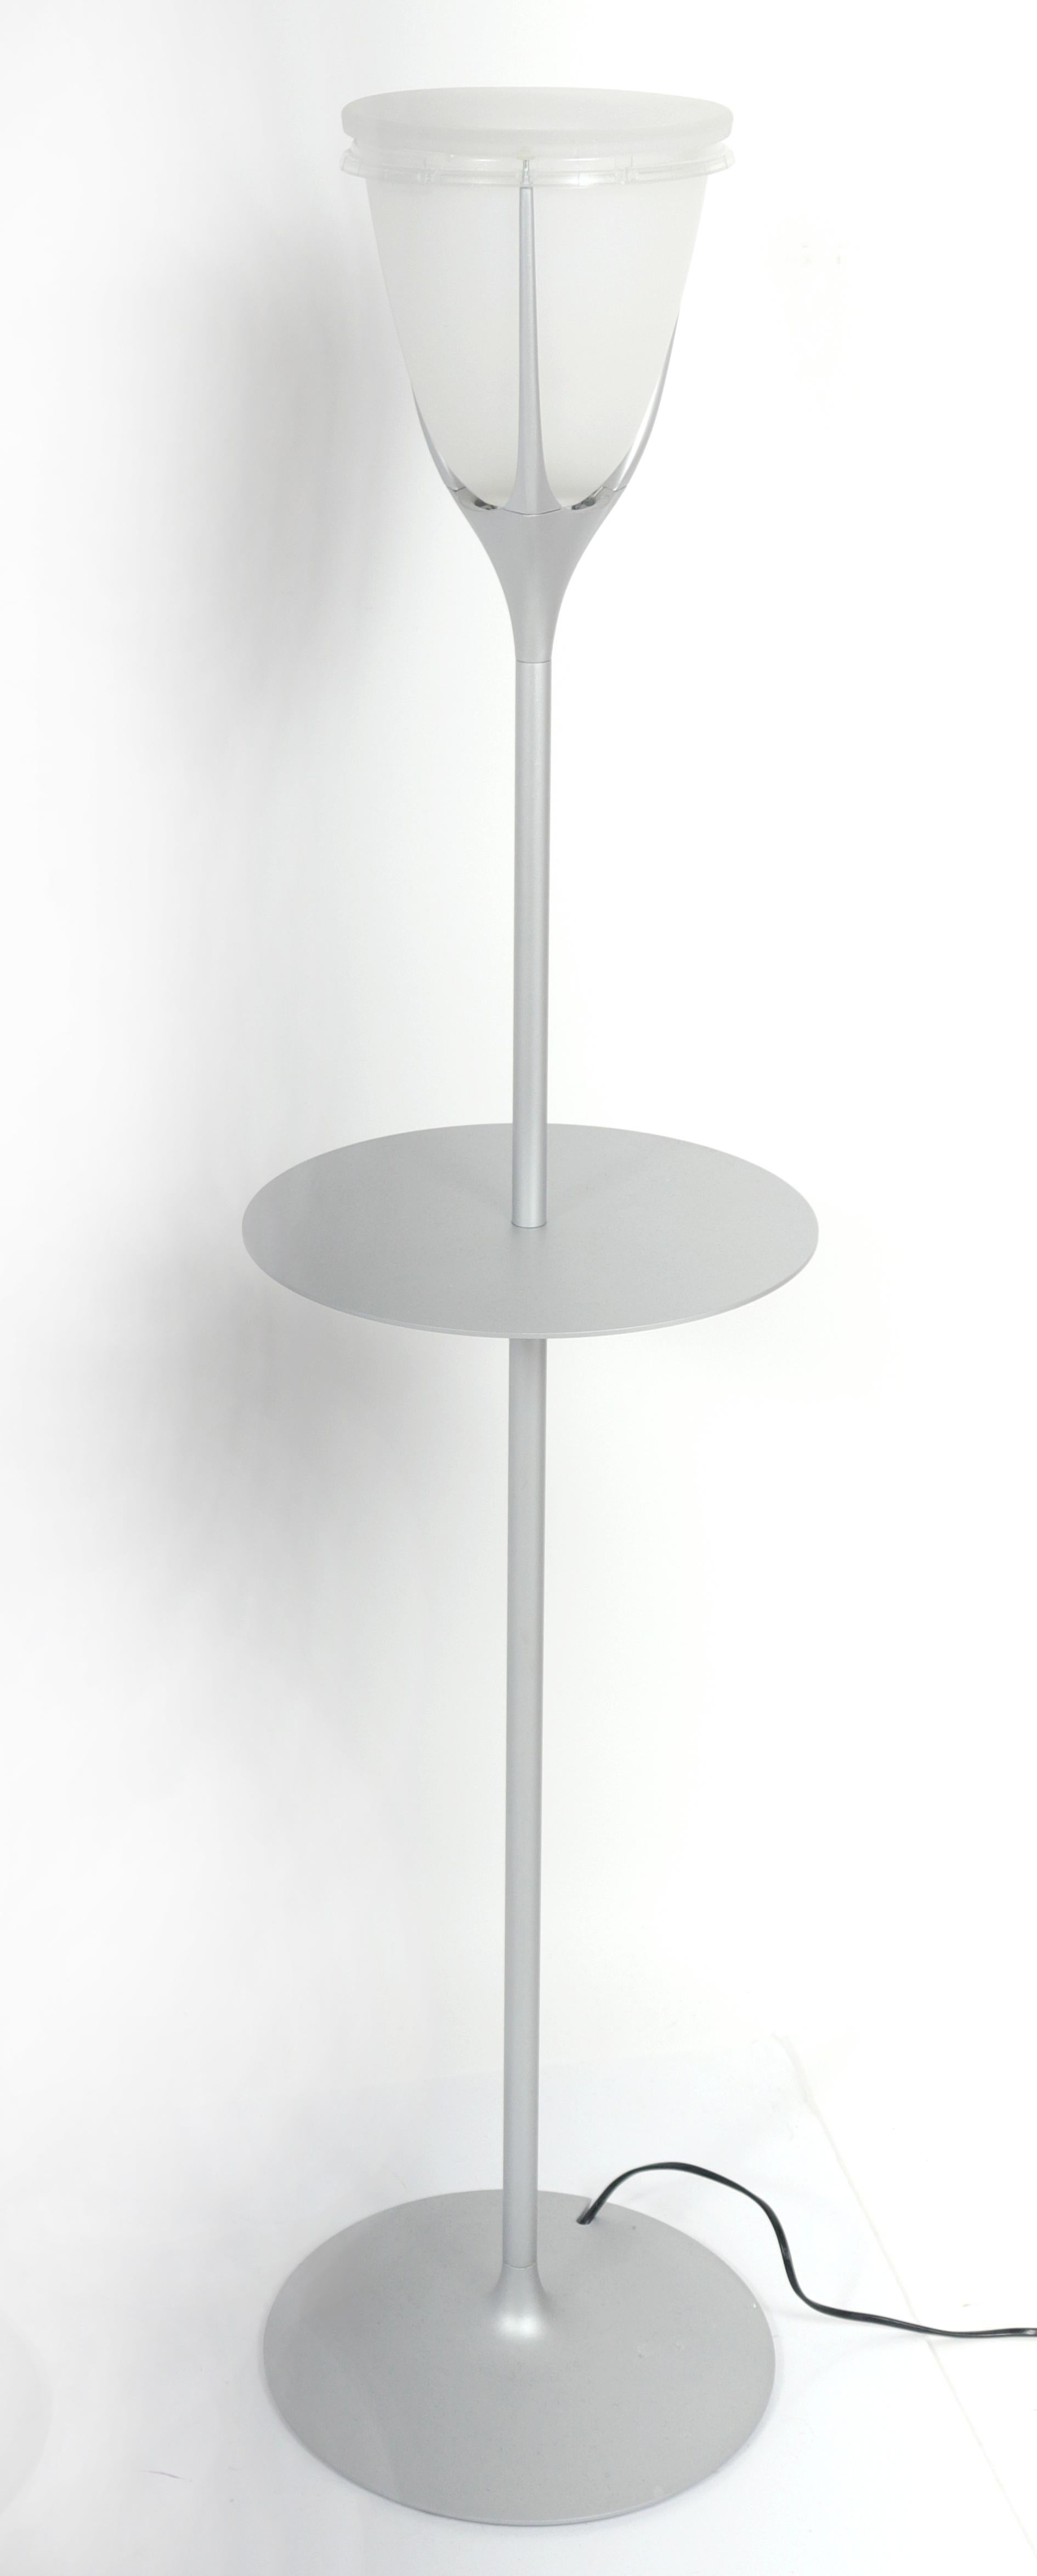 Pair of modern metal floor lamps with frosted glass shades and round shelves. Measures: 50.5